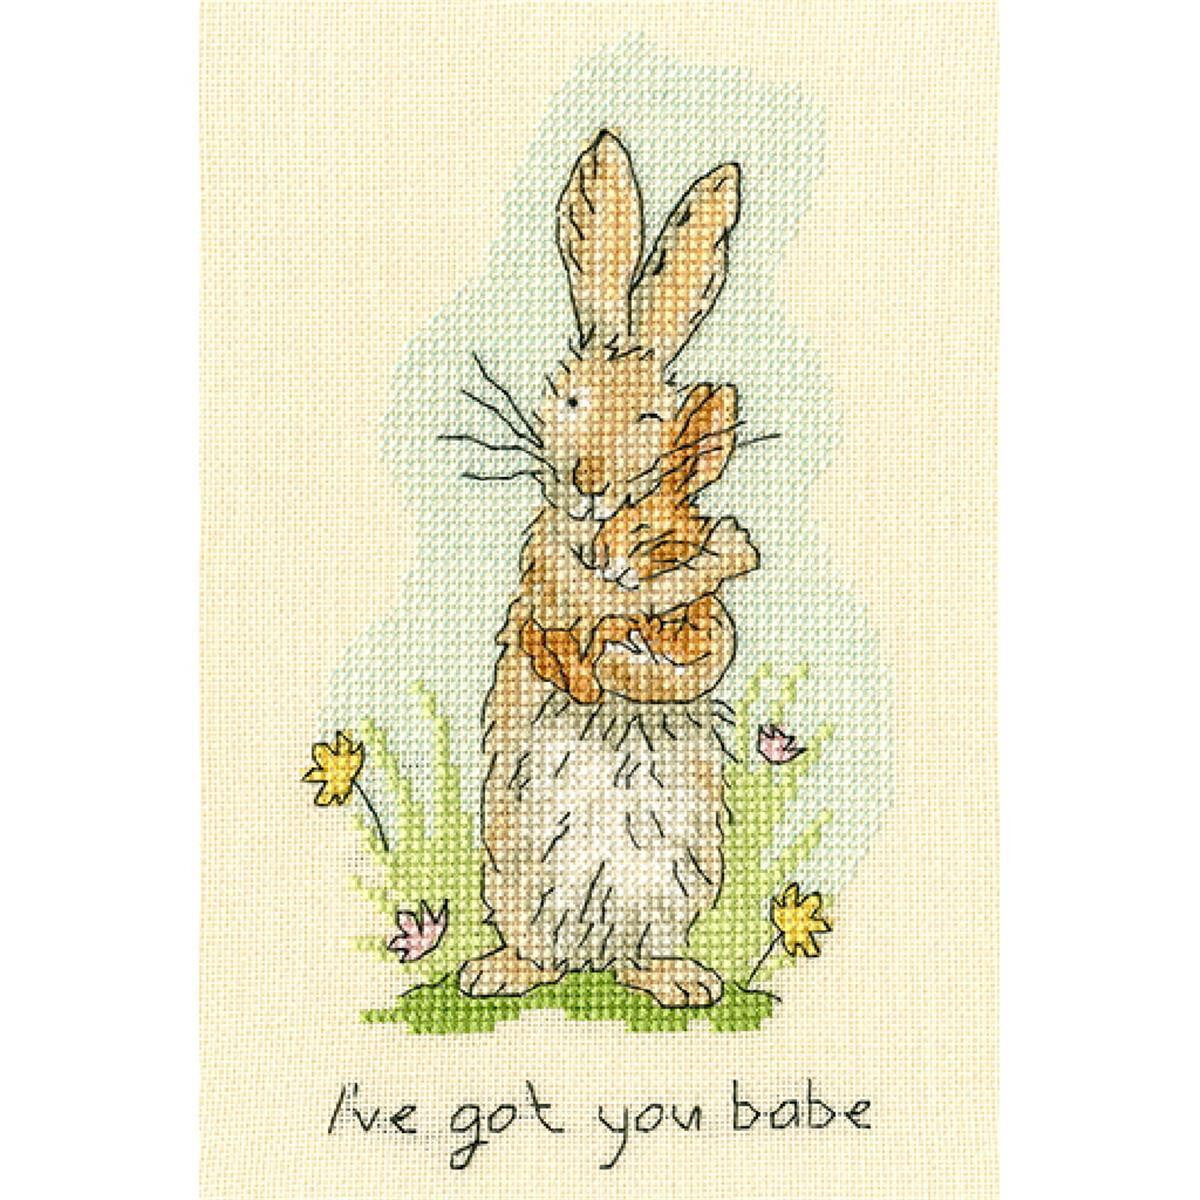 Bothy Threads counted cross stitch Kit "Ive Got You...